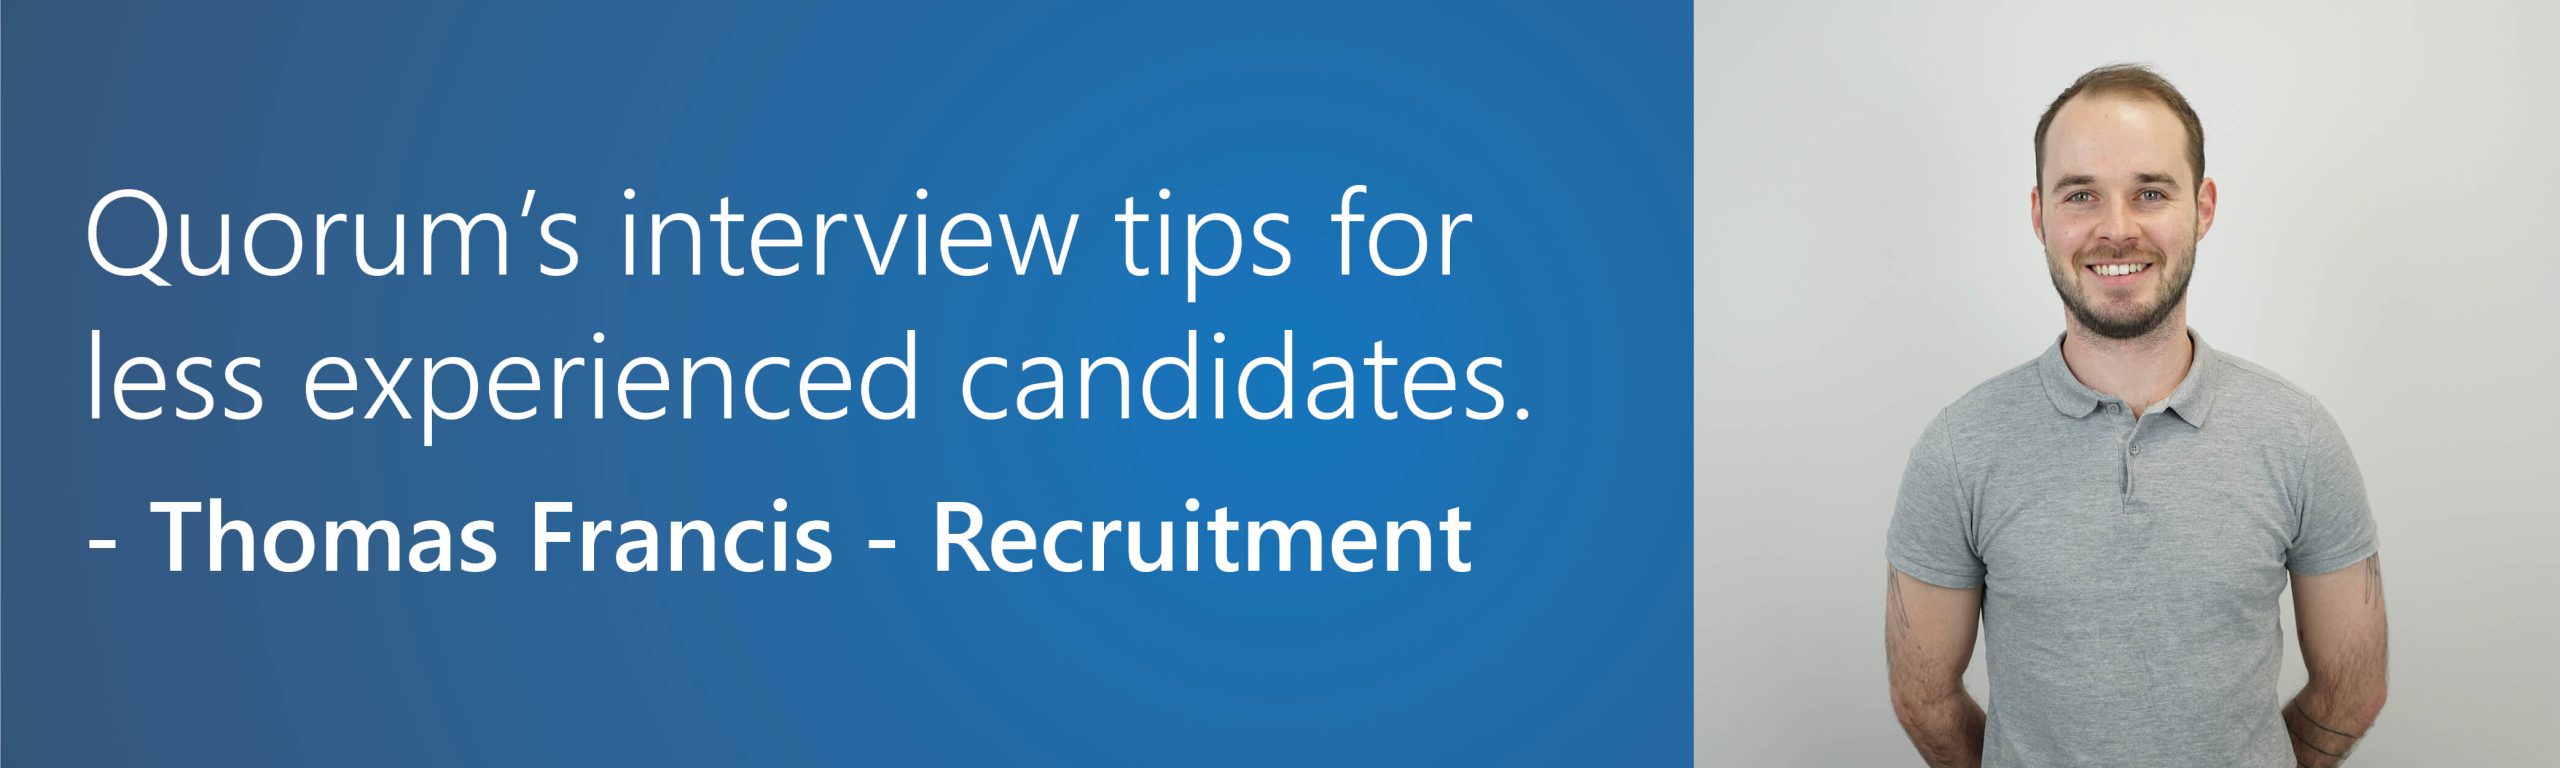 Quorum’s interview tips for<br />
less experienced candidates.